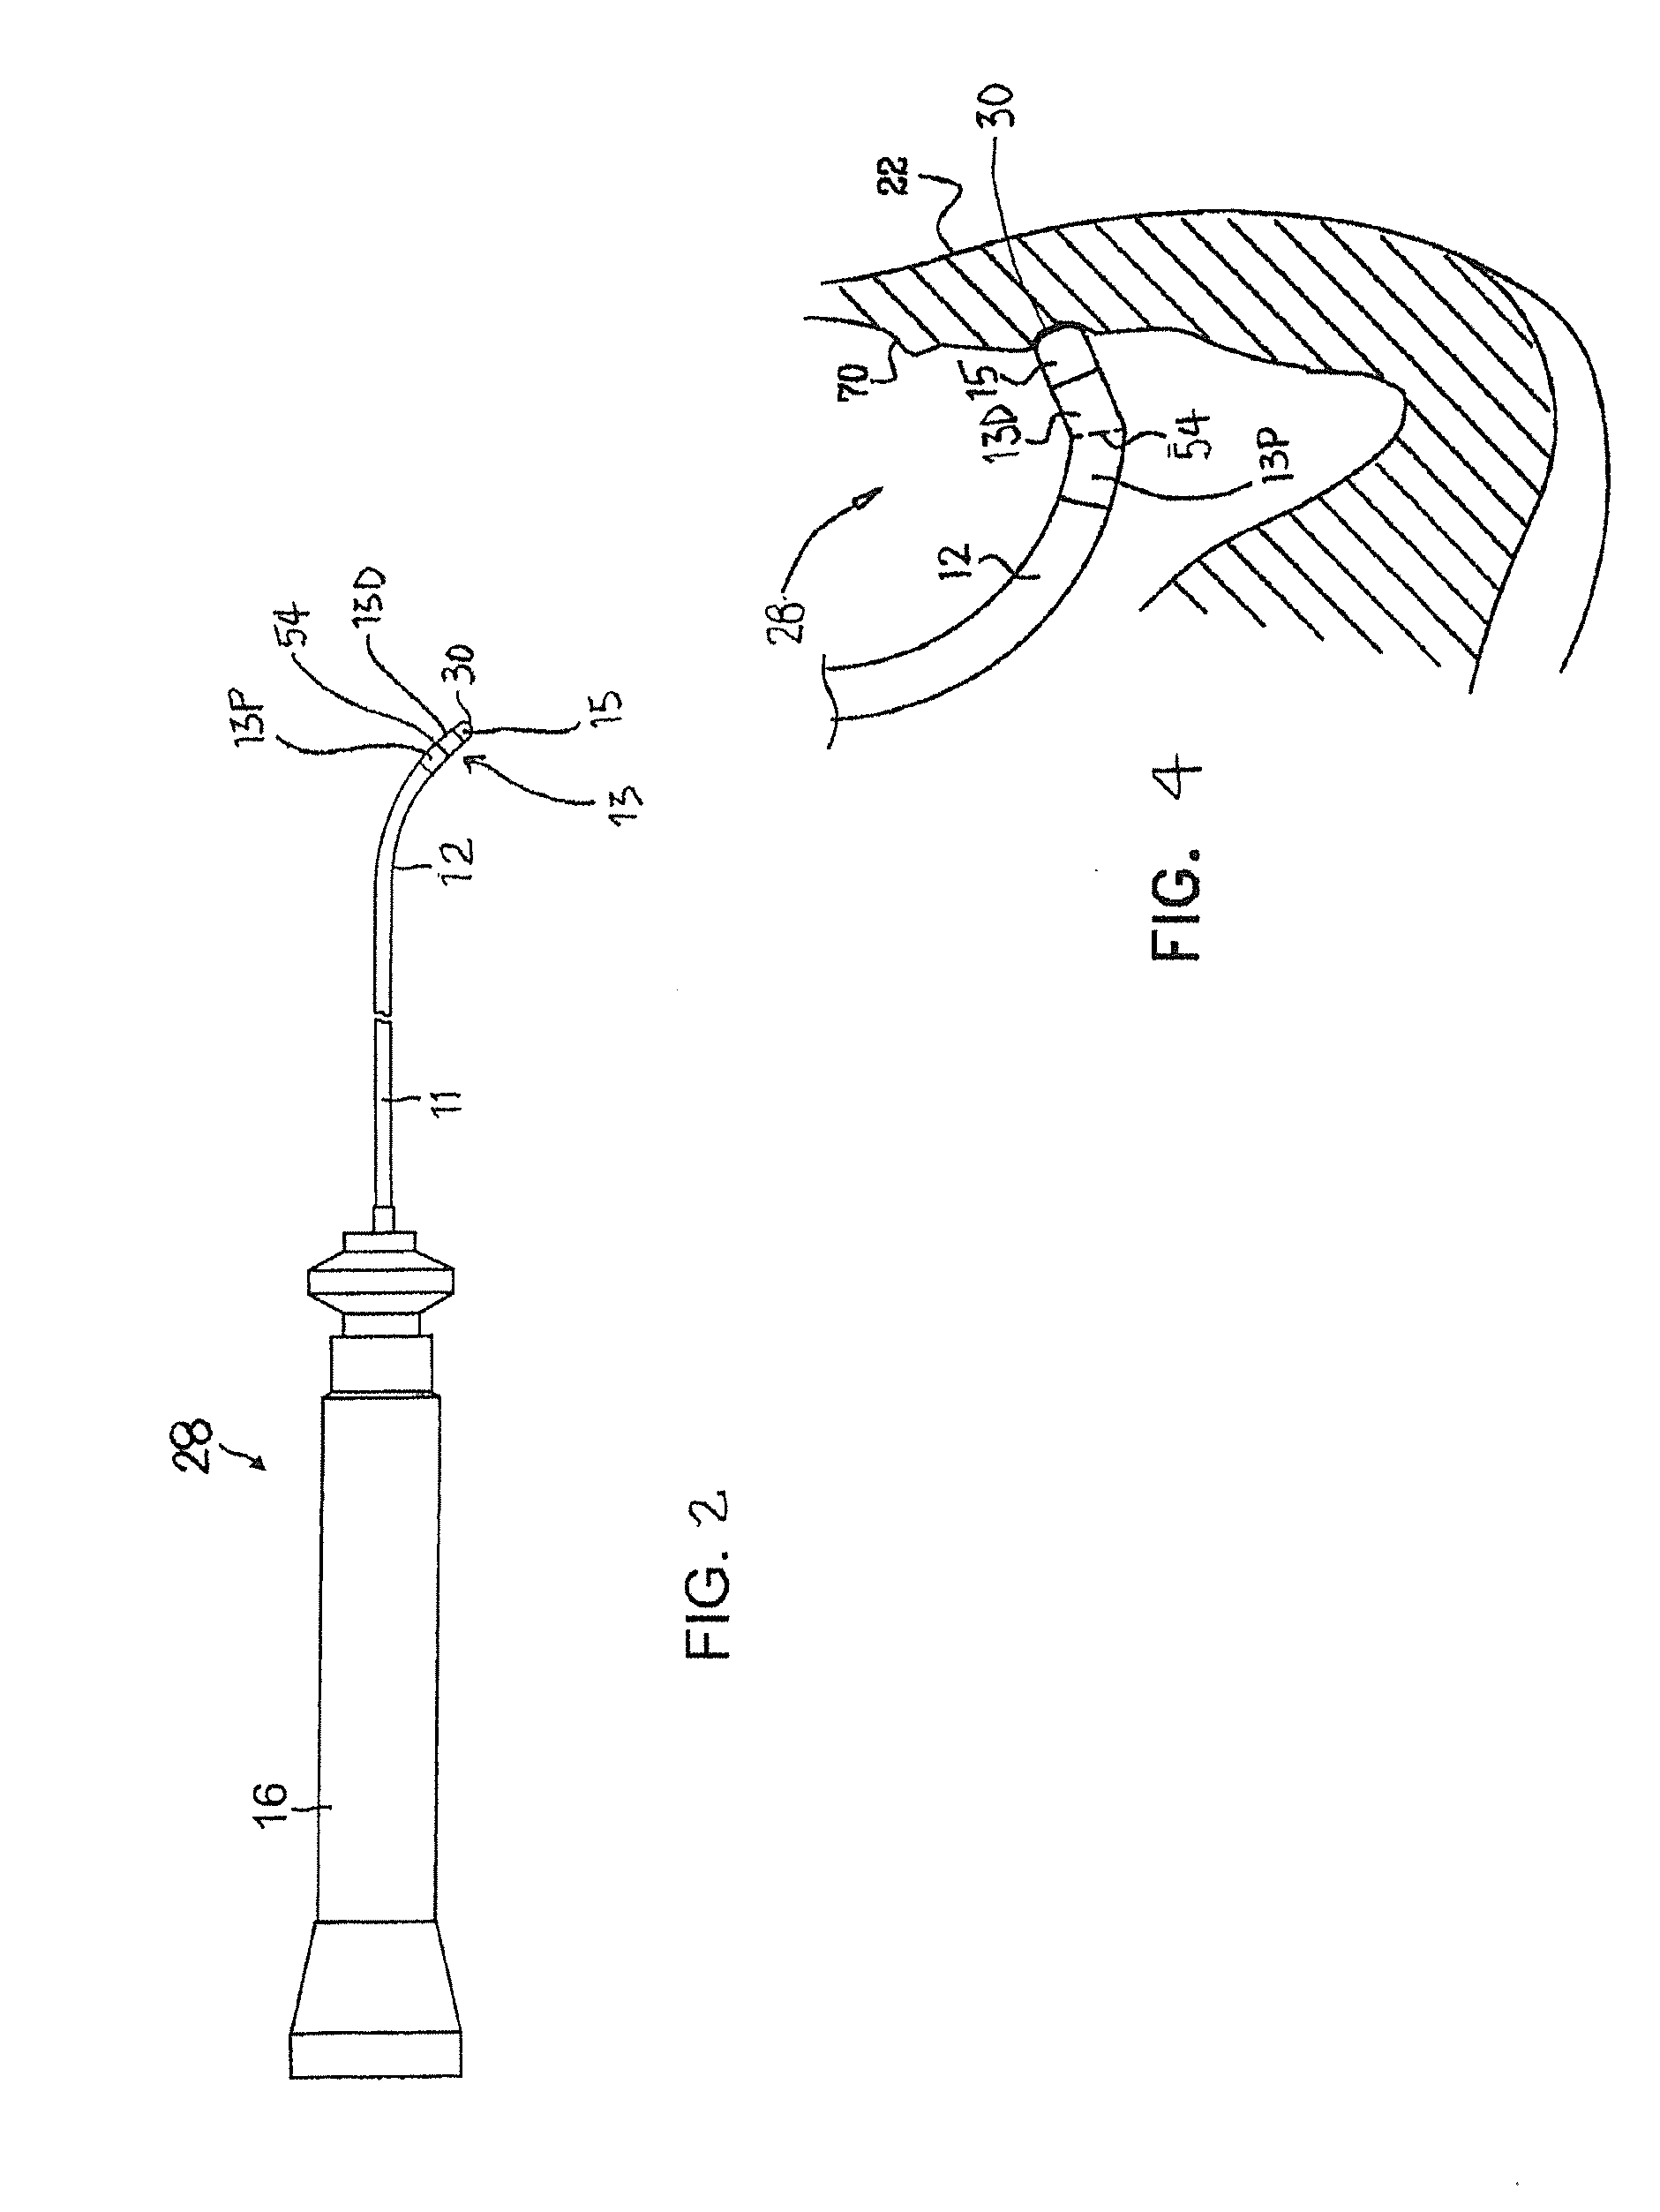 Catheter with serially connected sensing structures and methods of calibration and detection